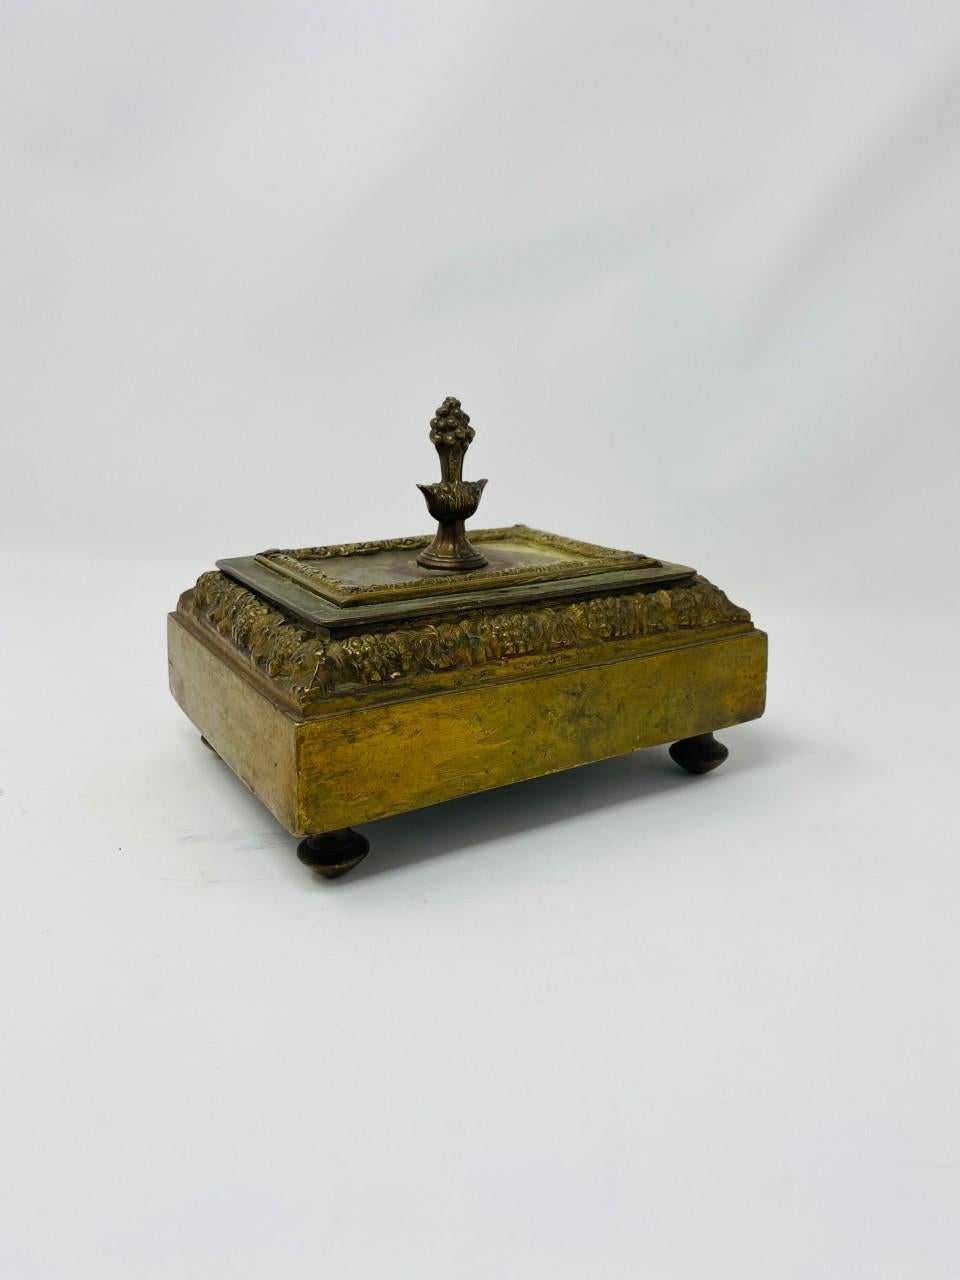 This fine antique of Austrian or possibly German bronze, stands raised on four feet with a finial cover that opens to a generous storage space. This box brings elements of the changing style of the 1920s with symmetry and severe lines in the body of